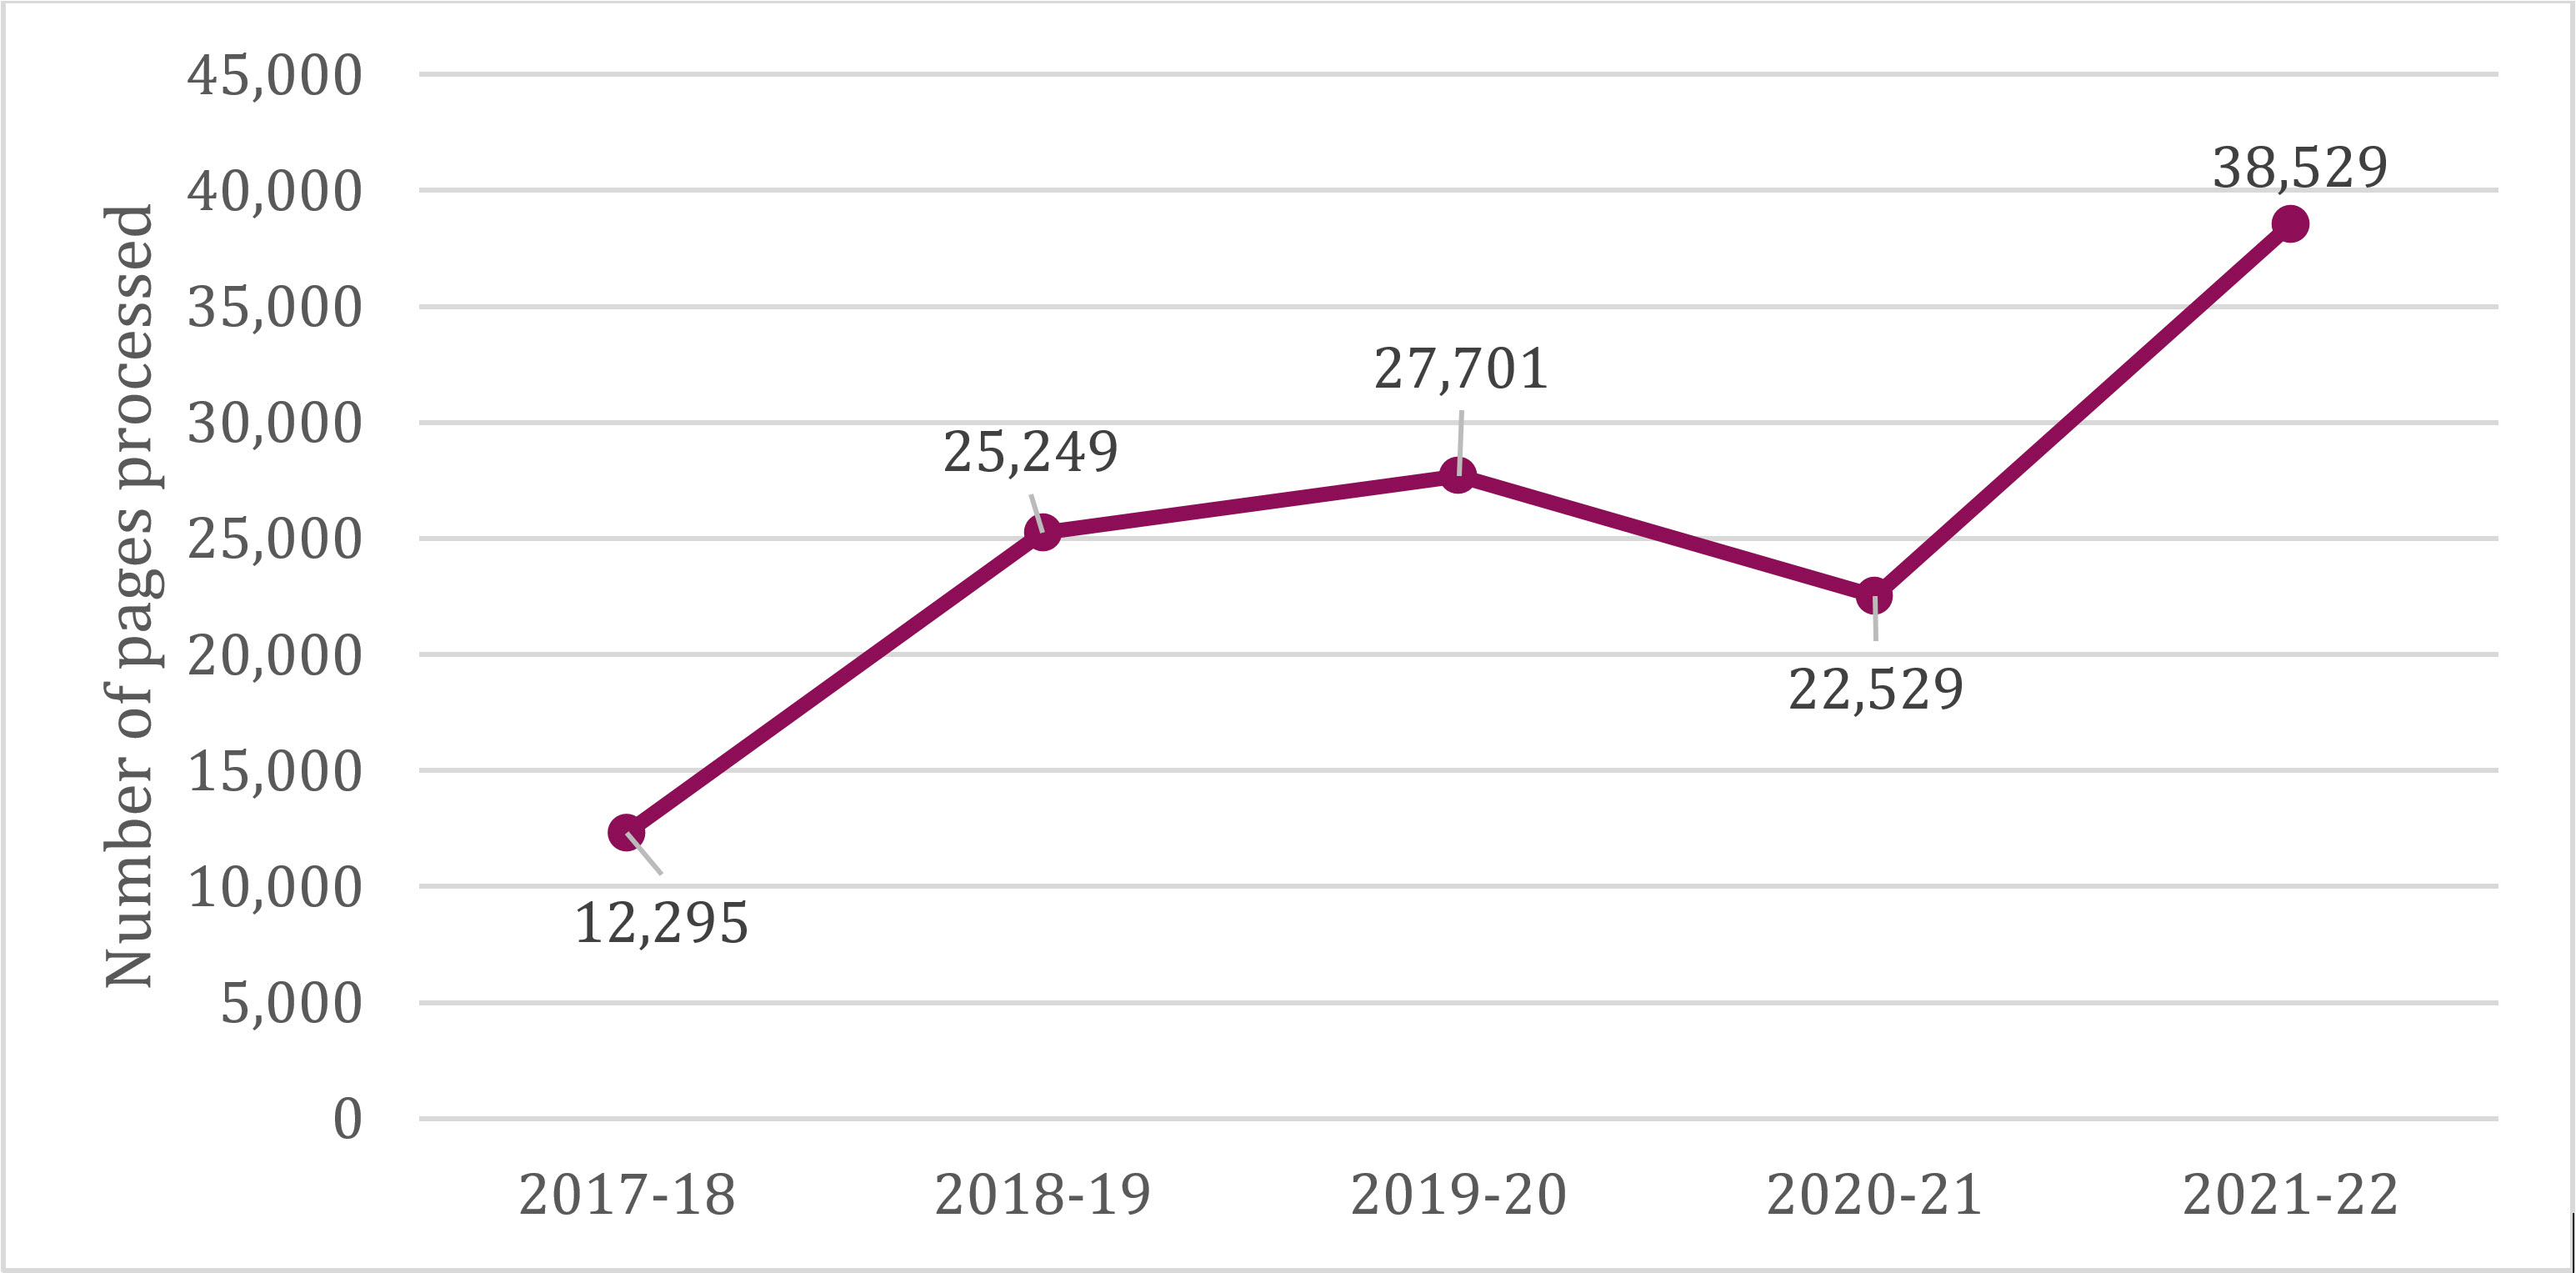 Number of pages processed, 2017-18 to 2021-22